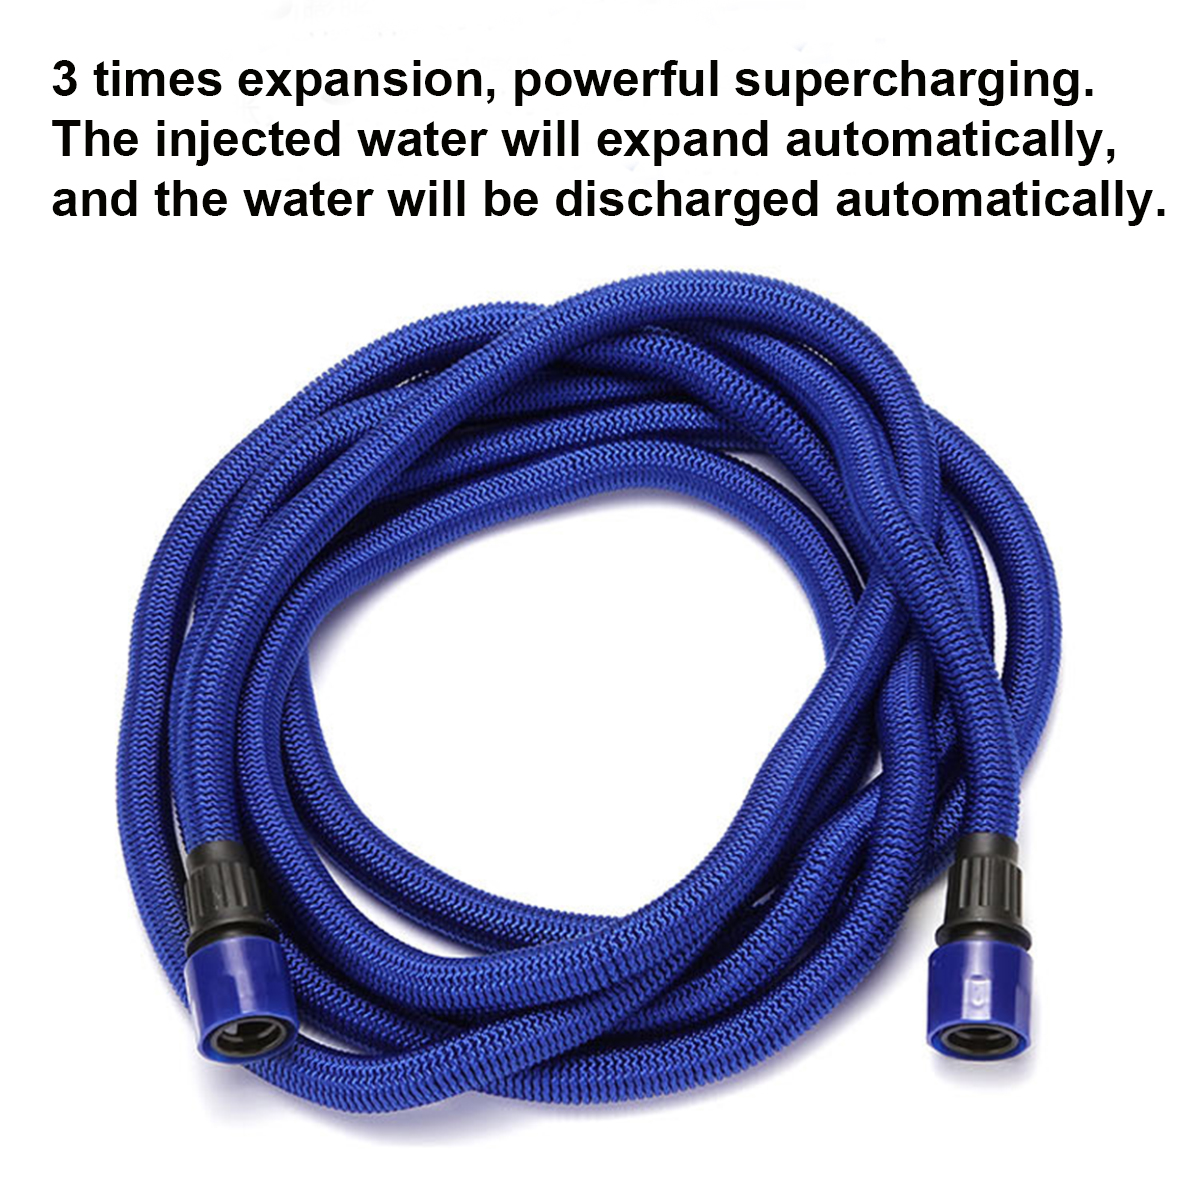 25-100ft-Expandable-Flexible-Garden-Water-Hose-Water-Pipe-Watering-Sprayer-1807508-5